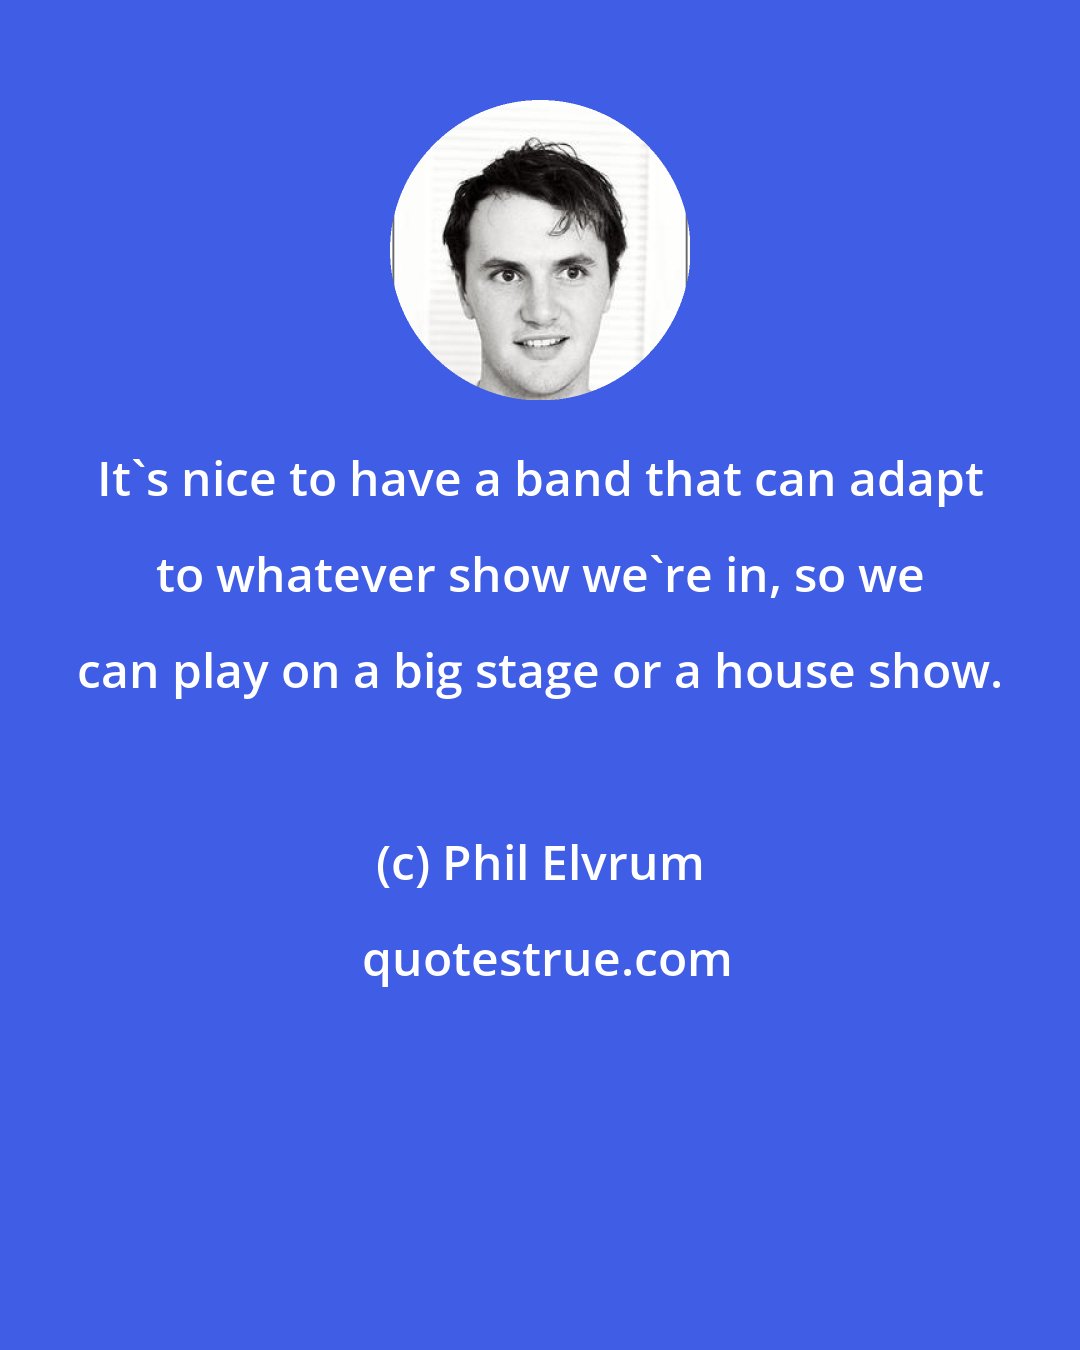 Phil Elvrum: It's nice to have a band that can adapt to whatever show we're in, so we can play on a big stage or a house show.